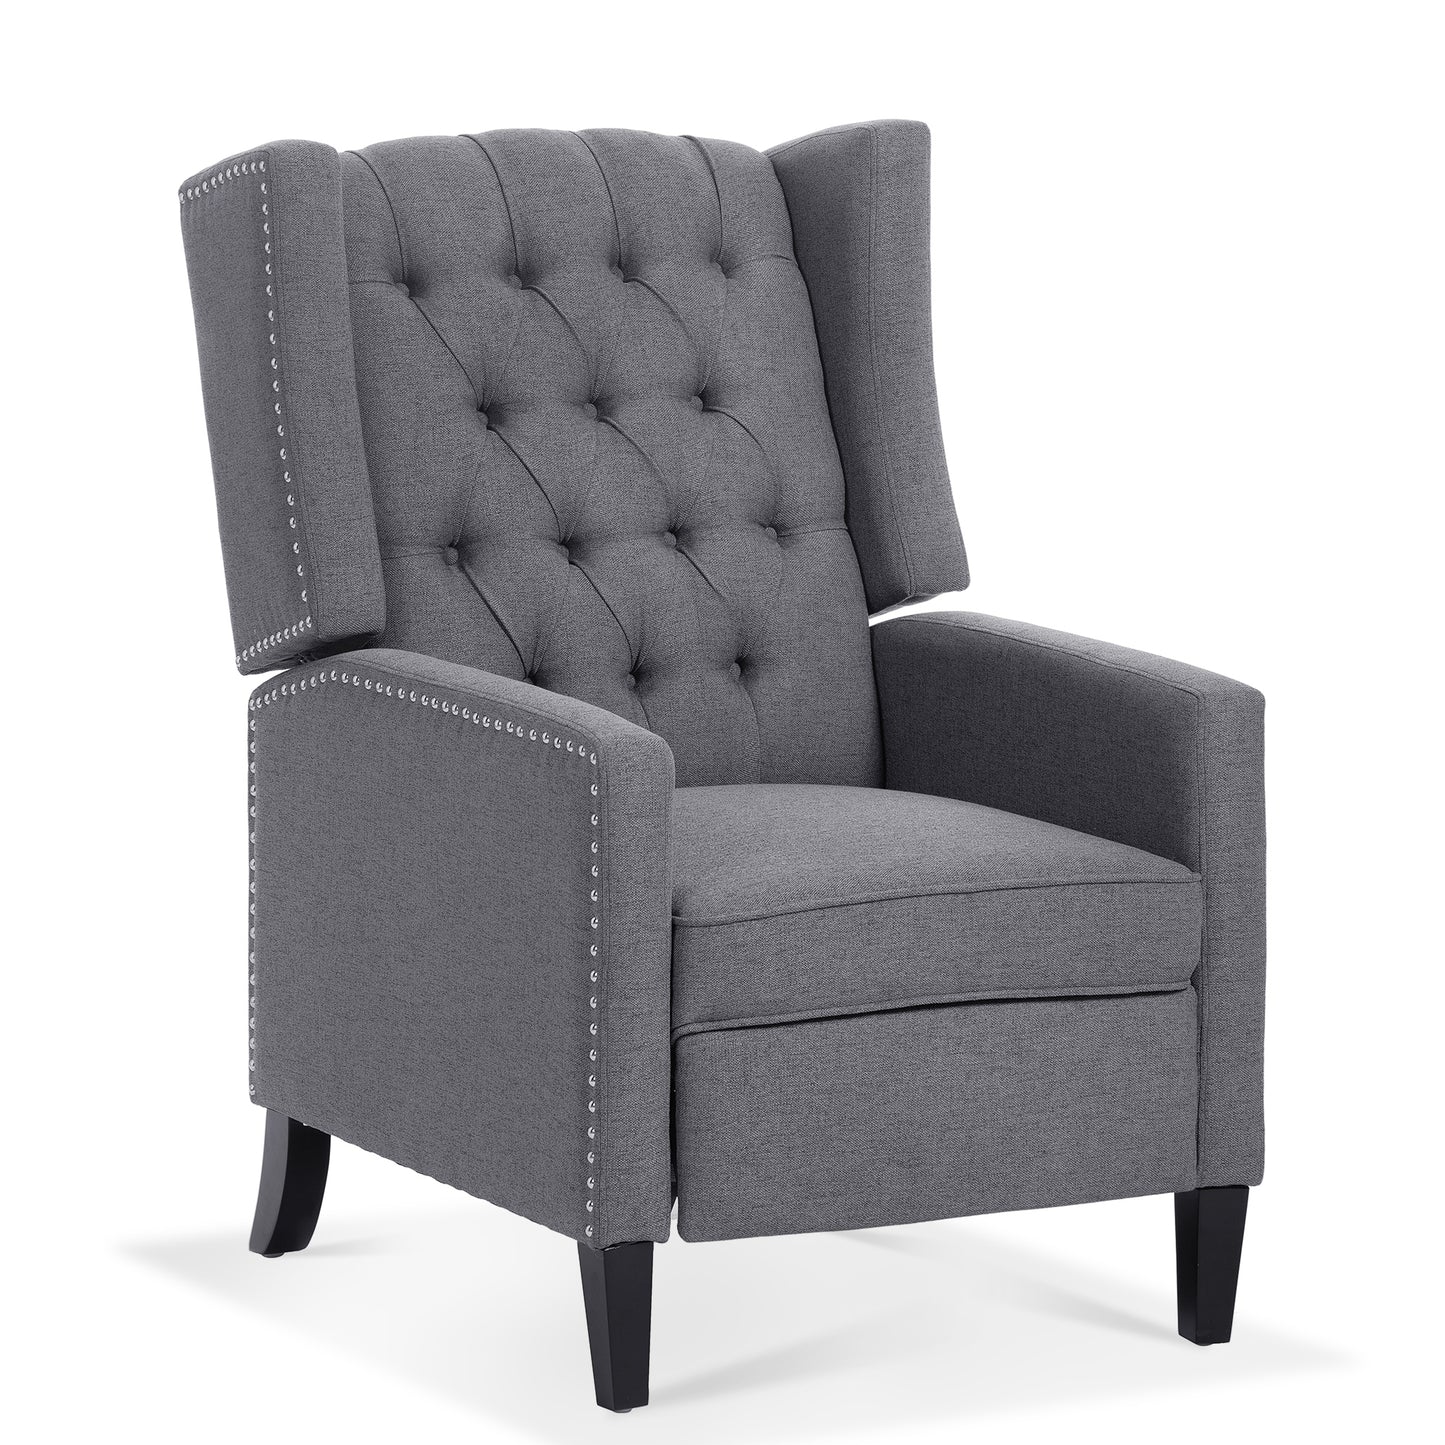 Wide Manual Wing Chair Recliner